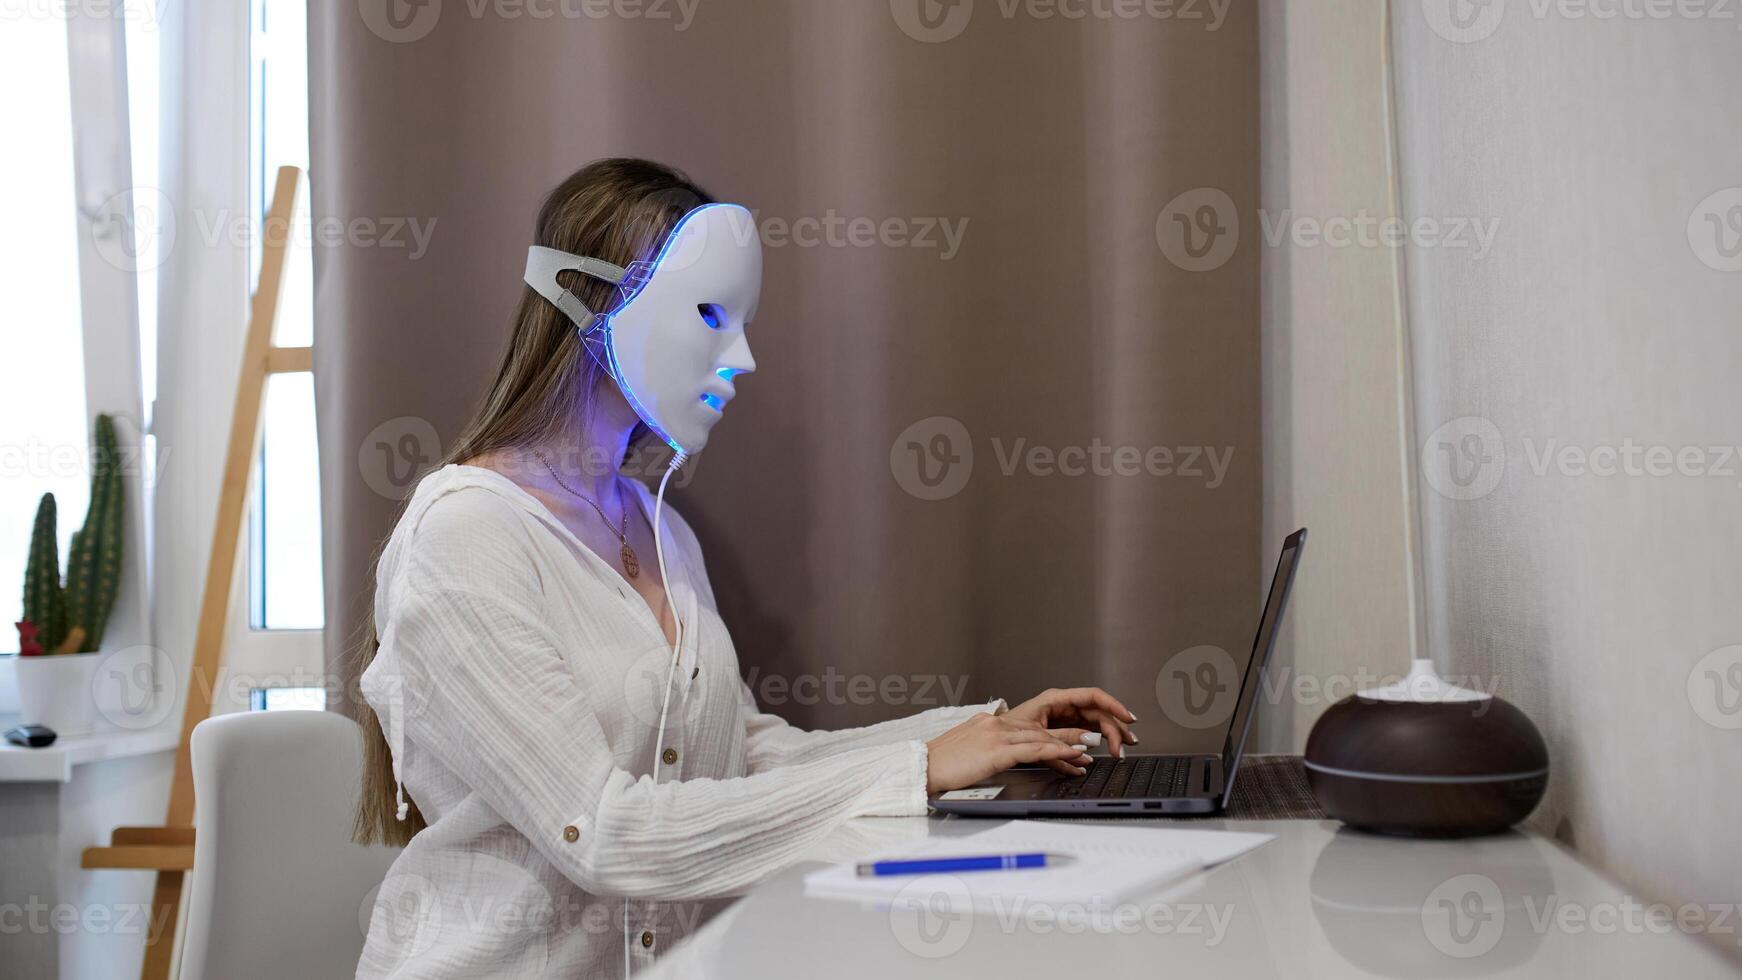 A beautiful girl with an LED mask on her head works at a laptop. Home skin care concept. photo